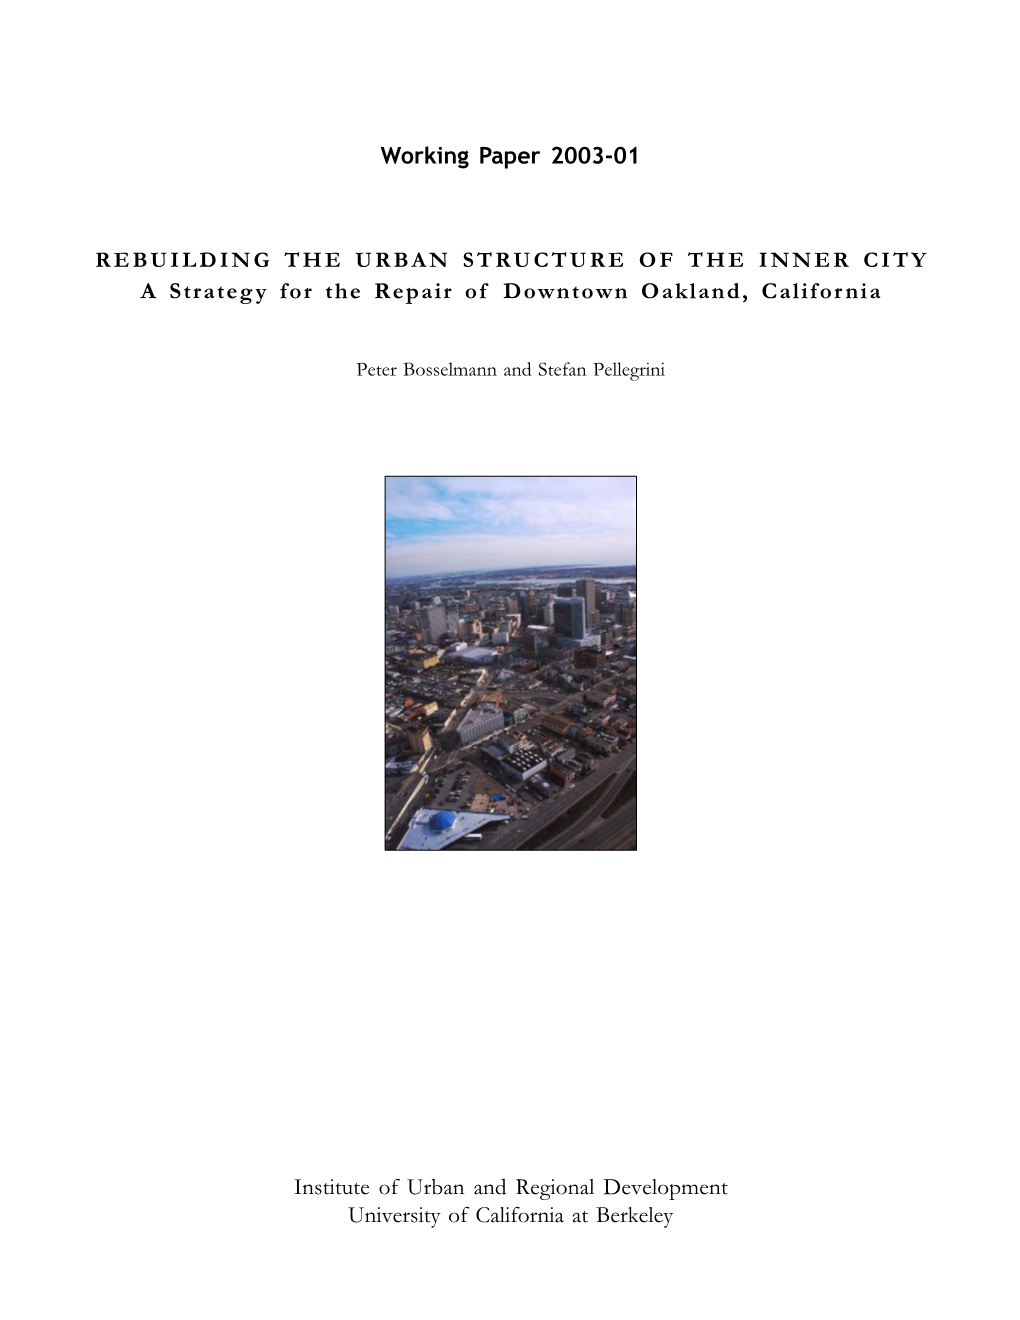 A Strategy for the Repair of Downtown Oakland, California Institute of Urban and Regional Development University of California A